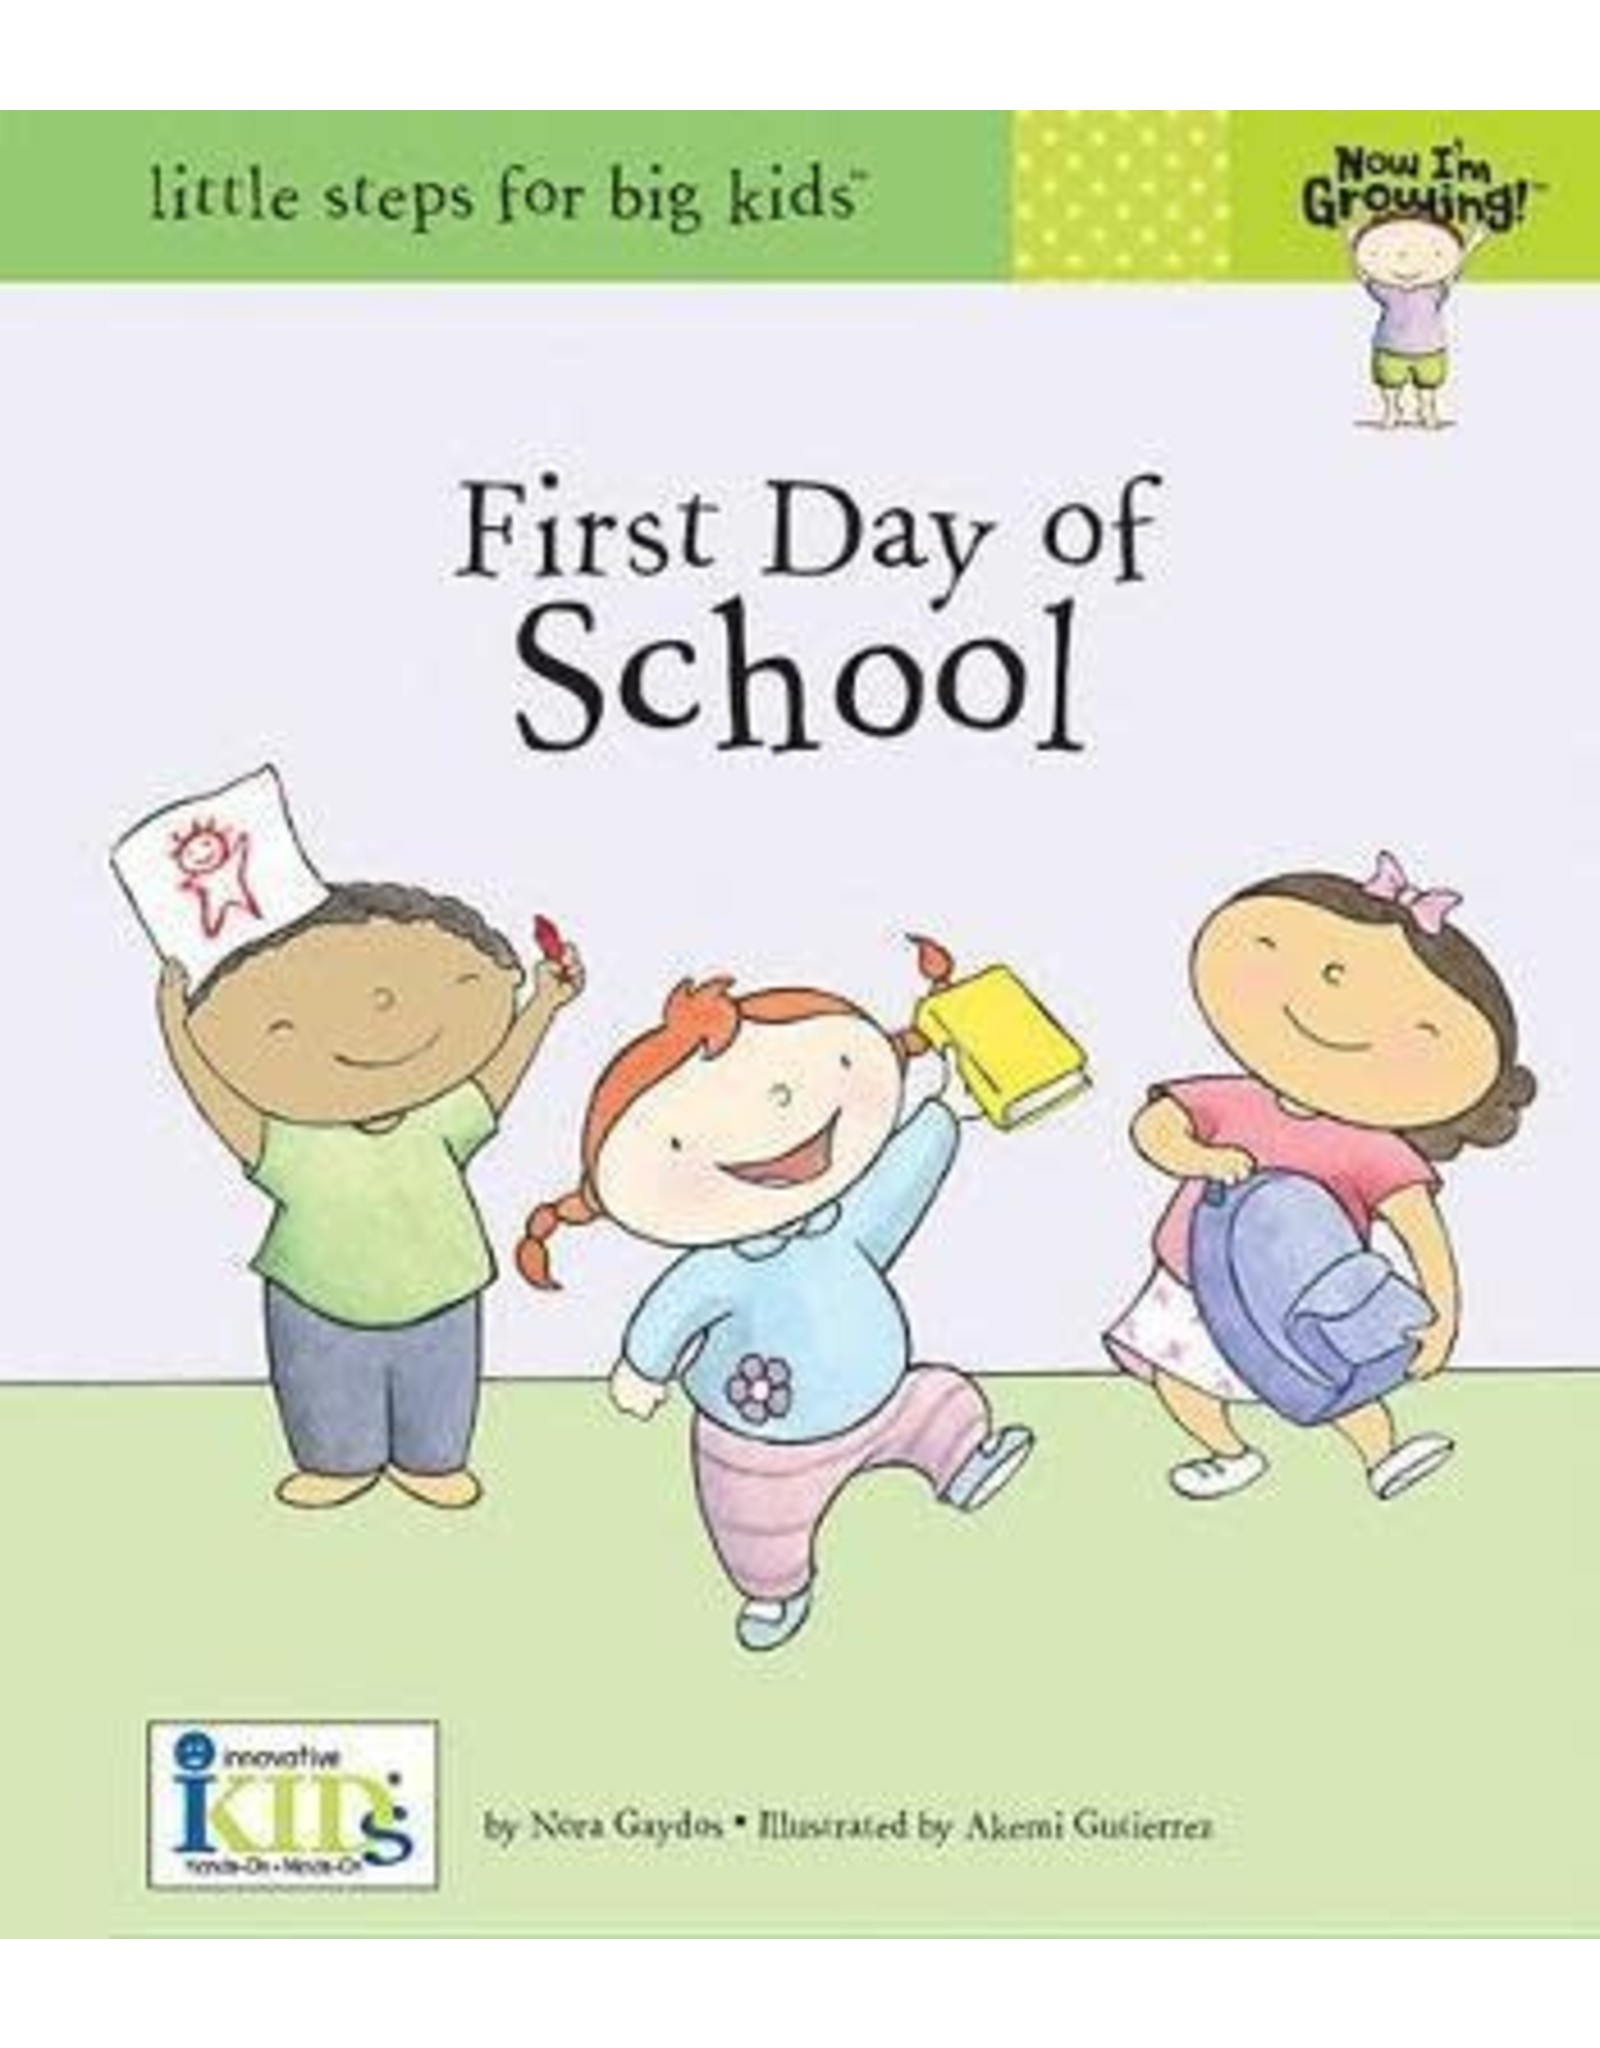 Now I'm Growing: First Day of School - Nora Gaydos